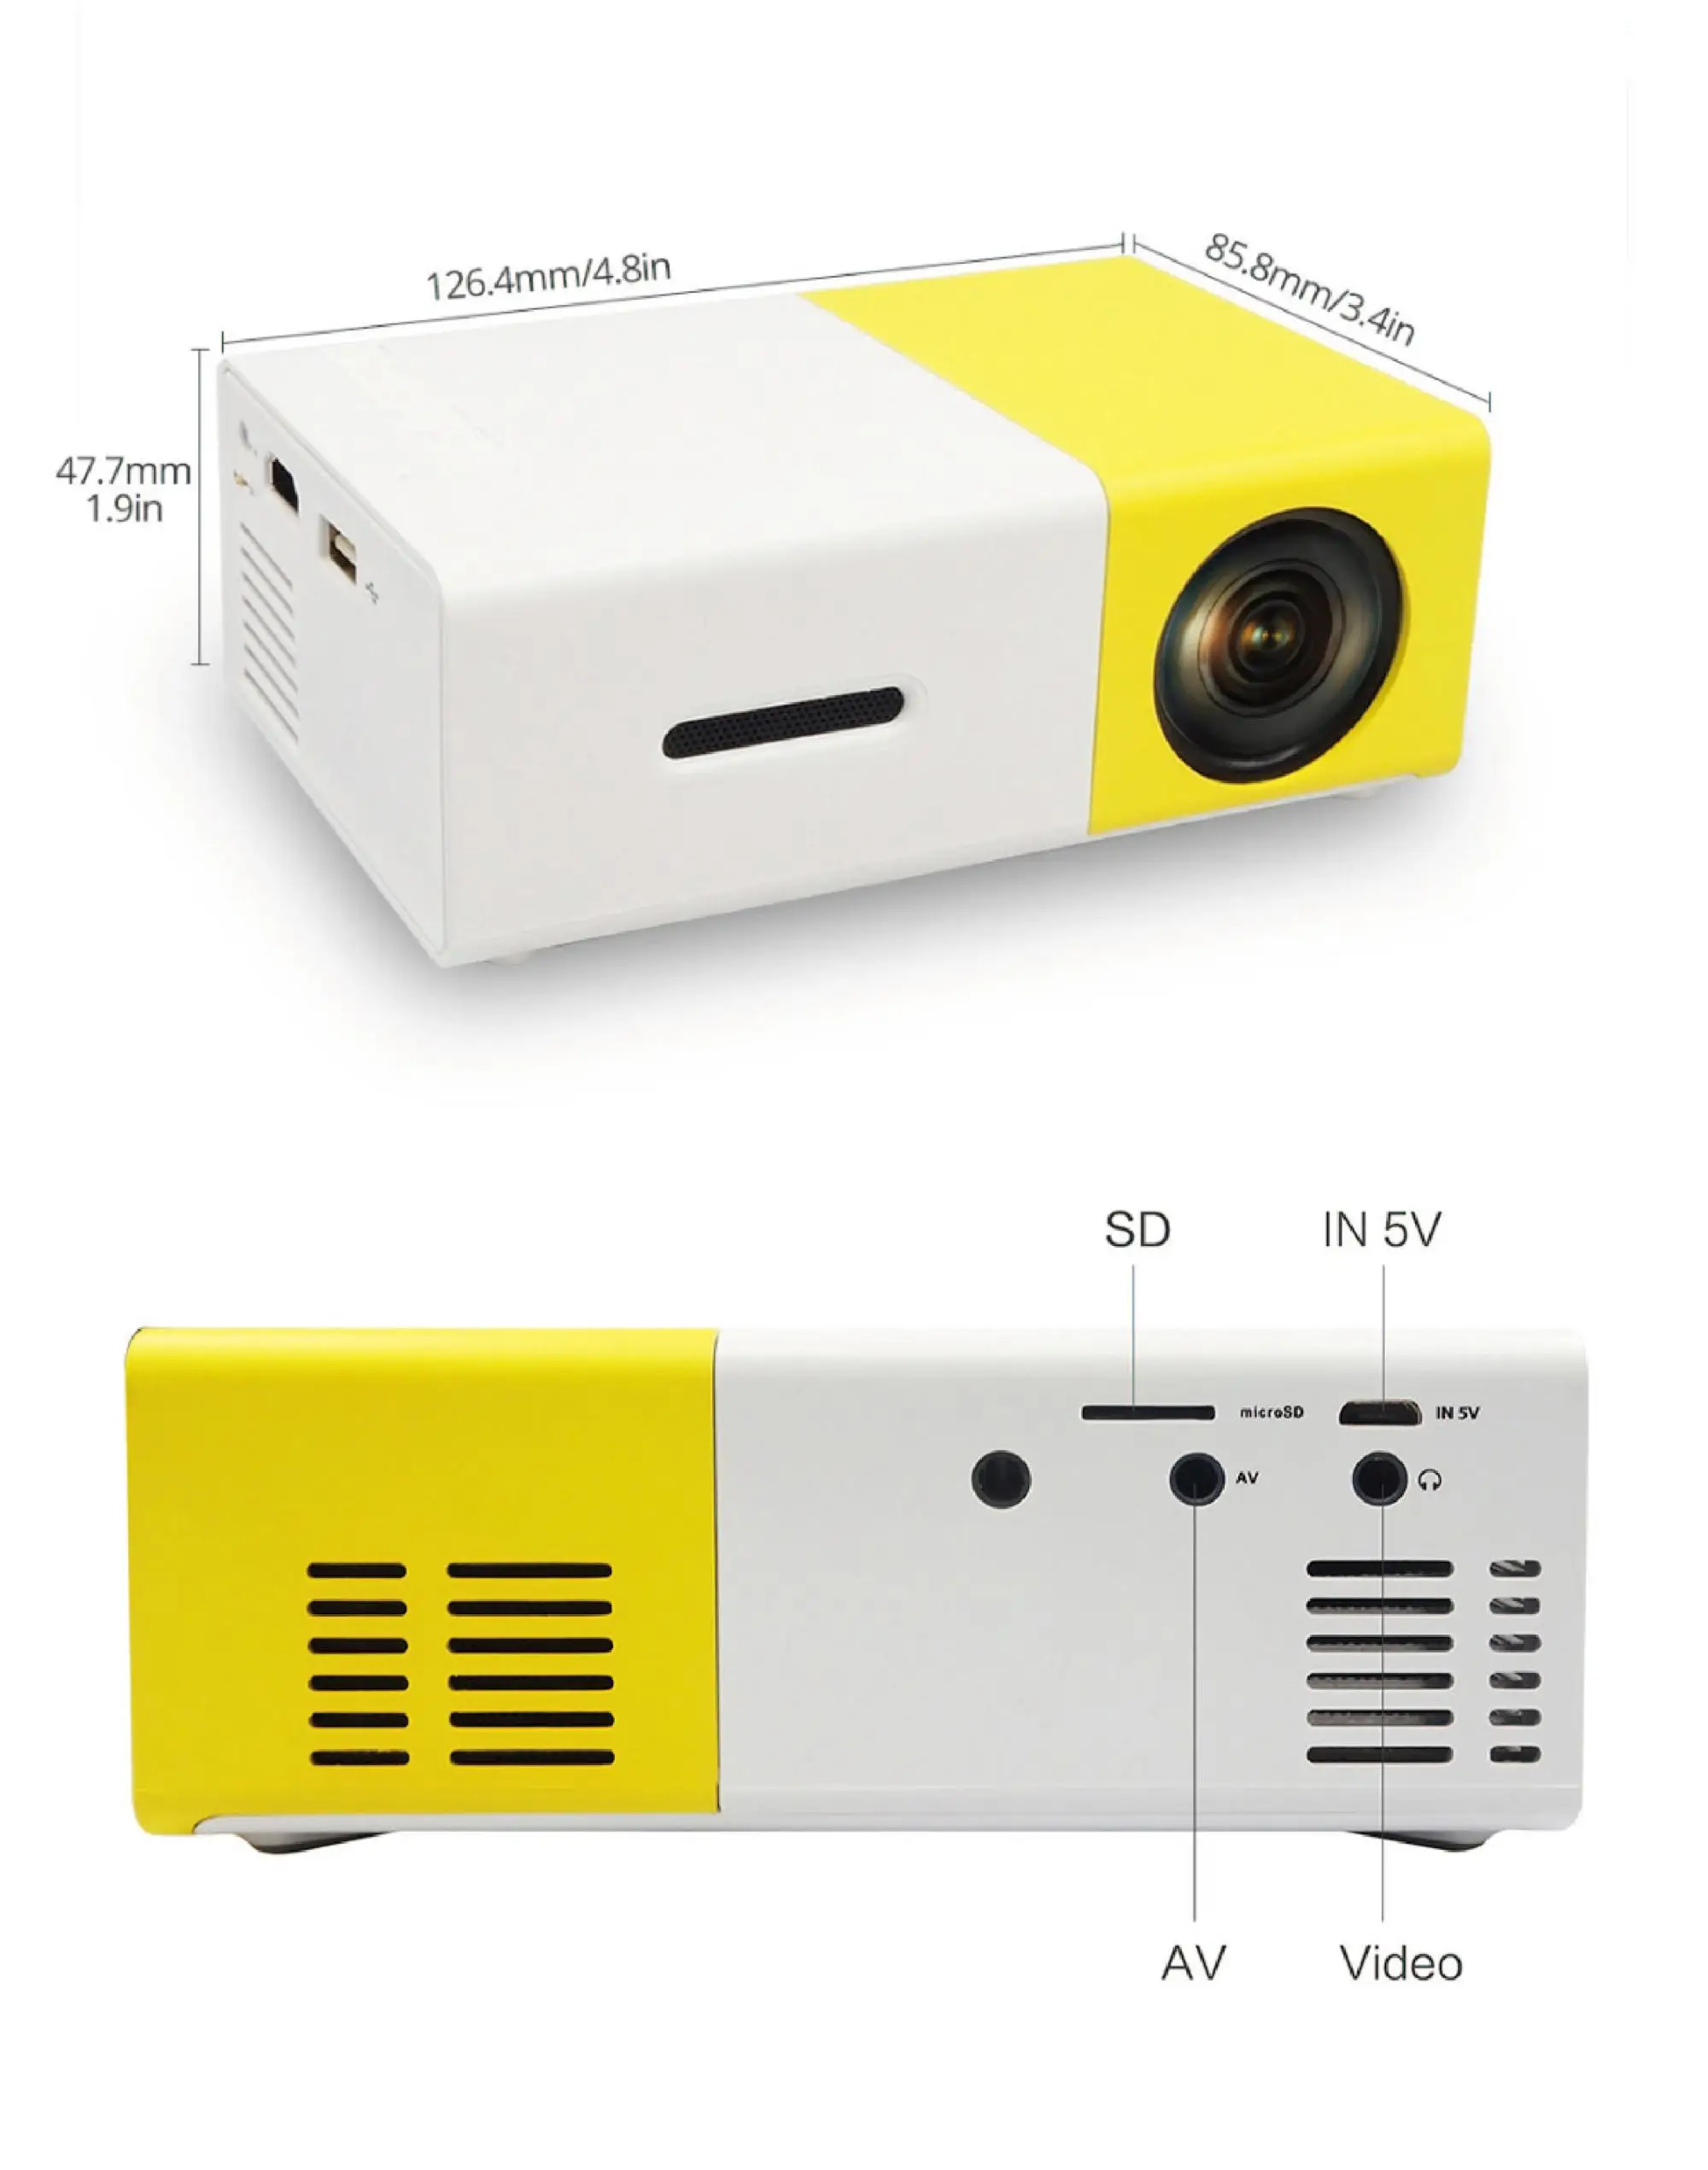 Mini led projector YG300 smart mini android pocket projector 600 lumens 3D for outdoor home theater cell phone use